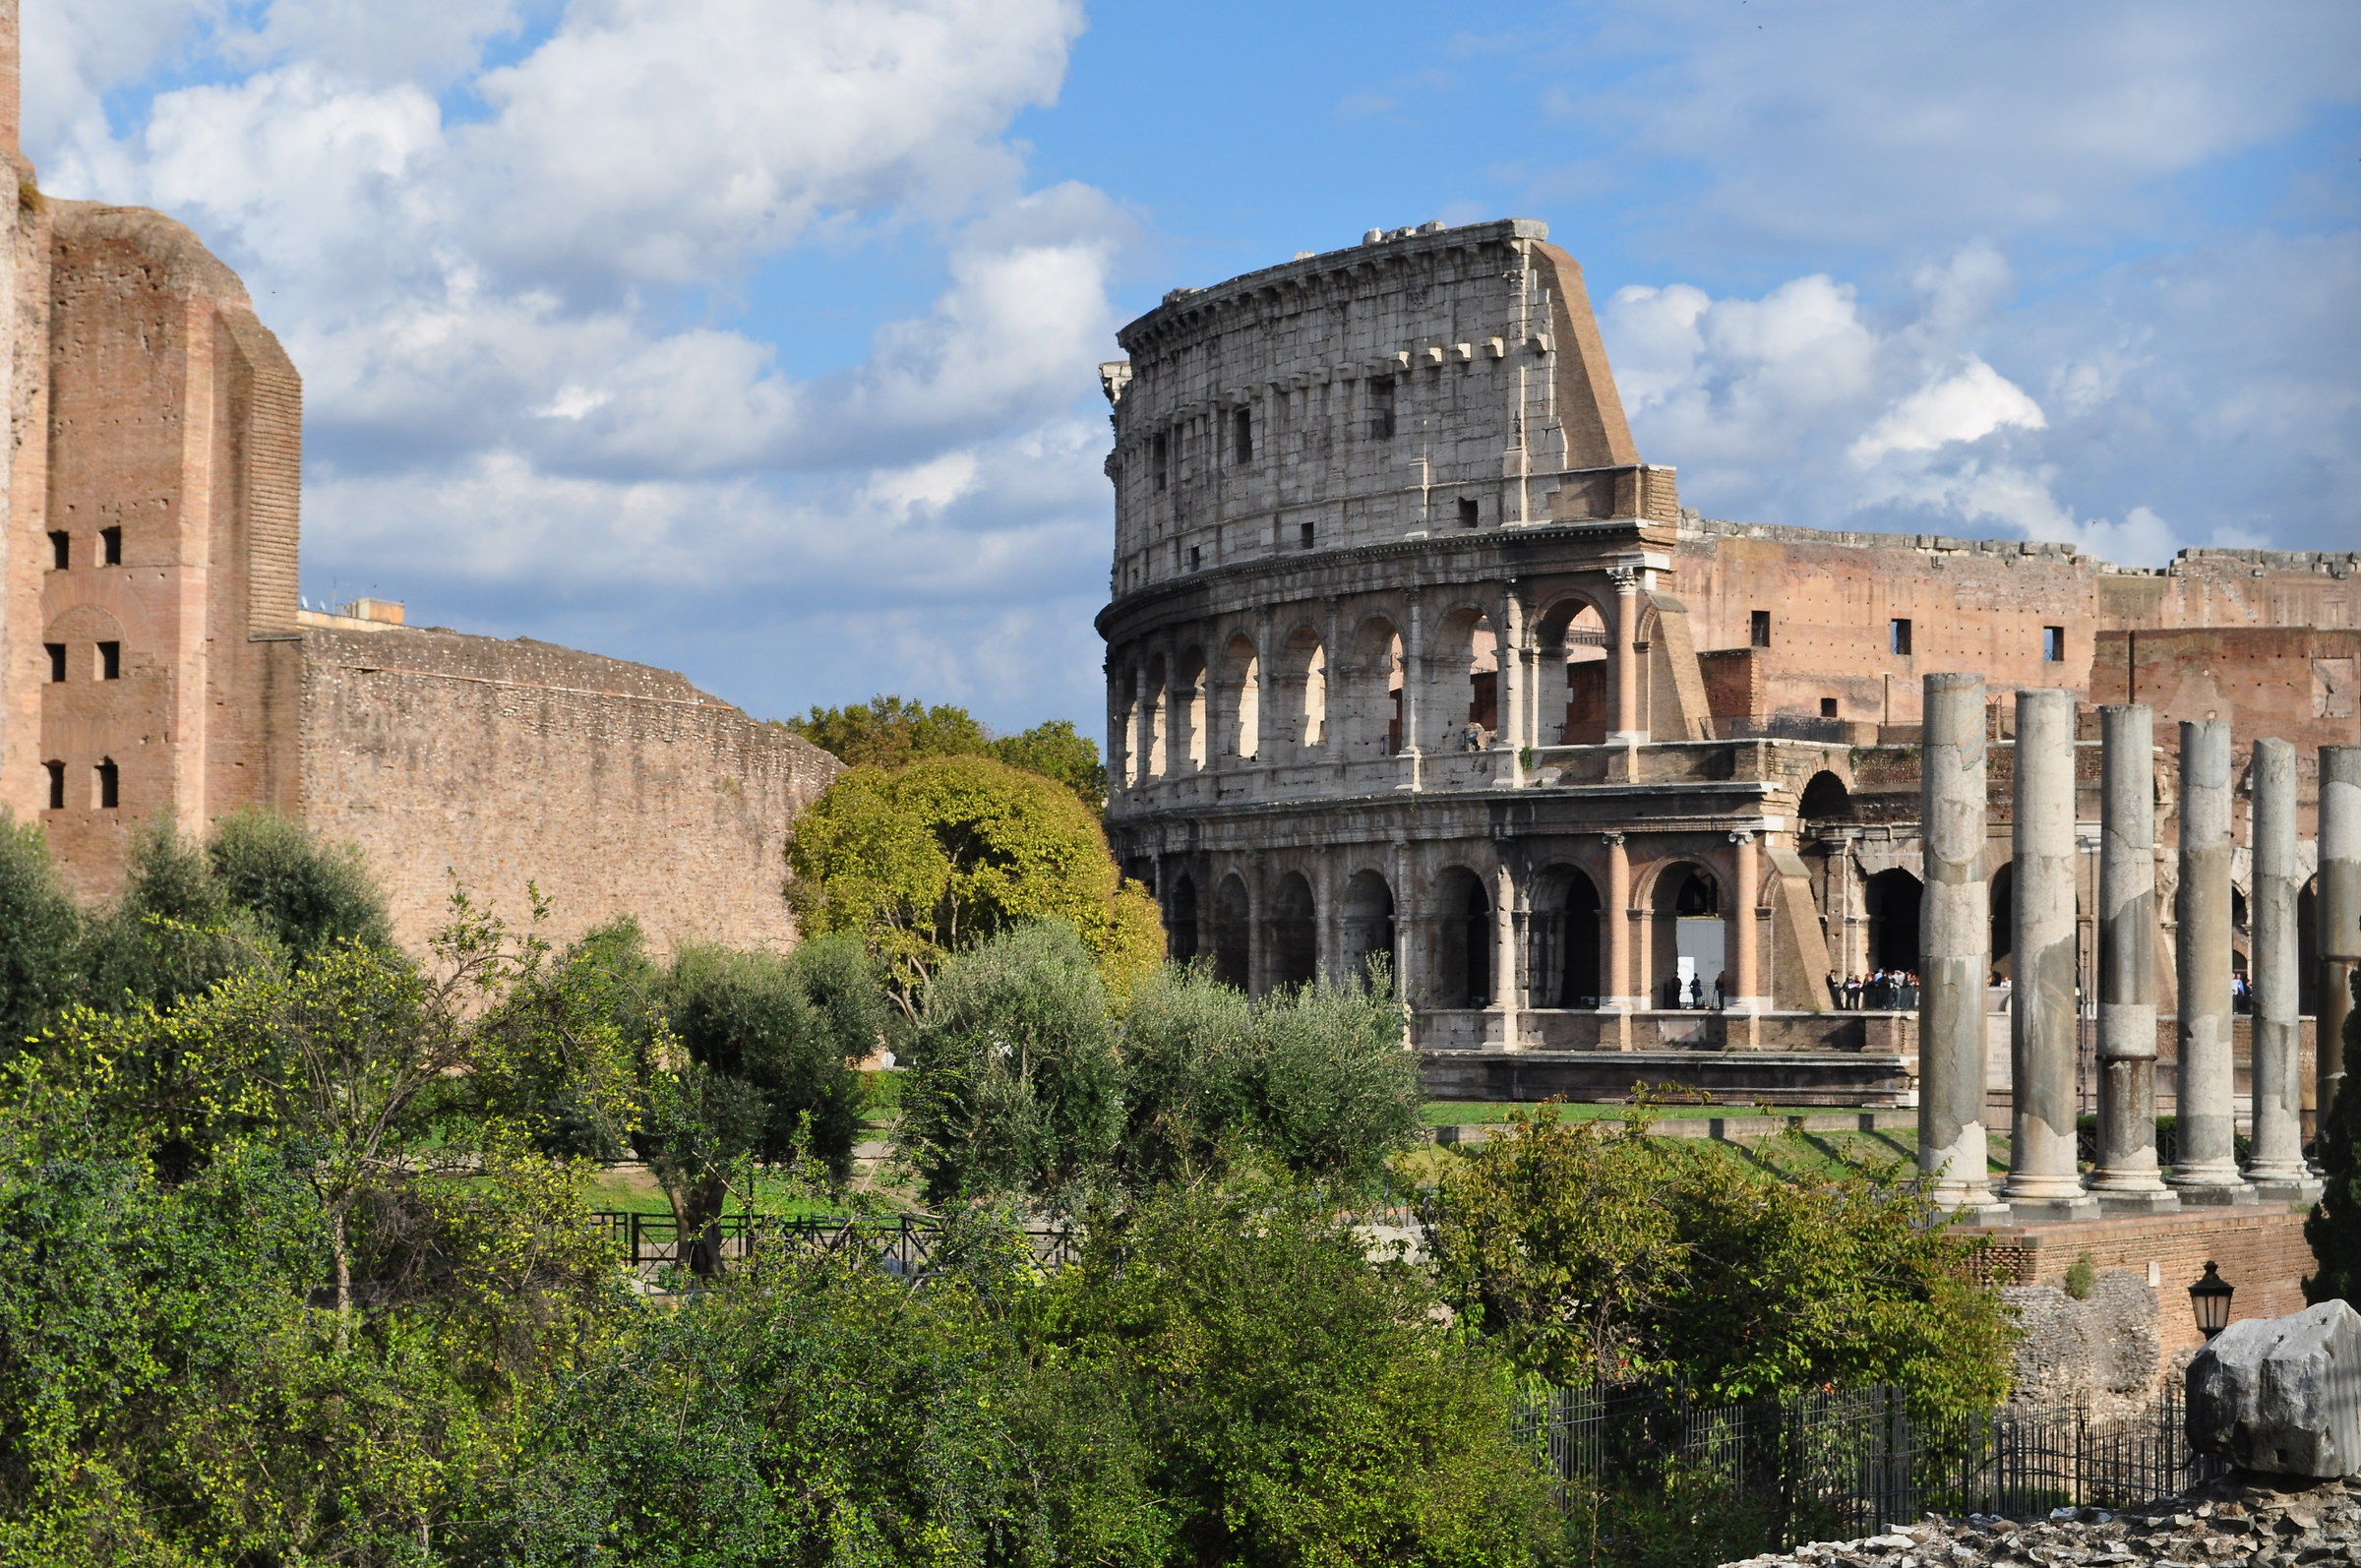 view of the Colosseum...